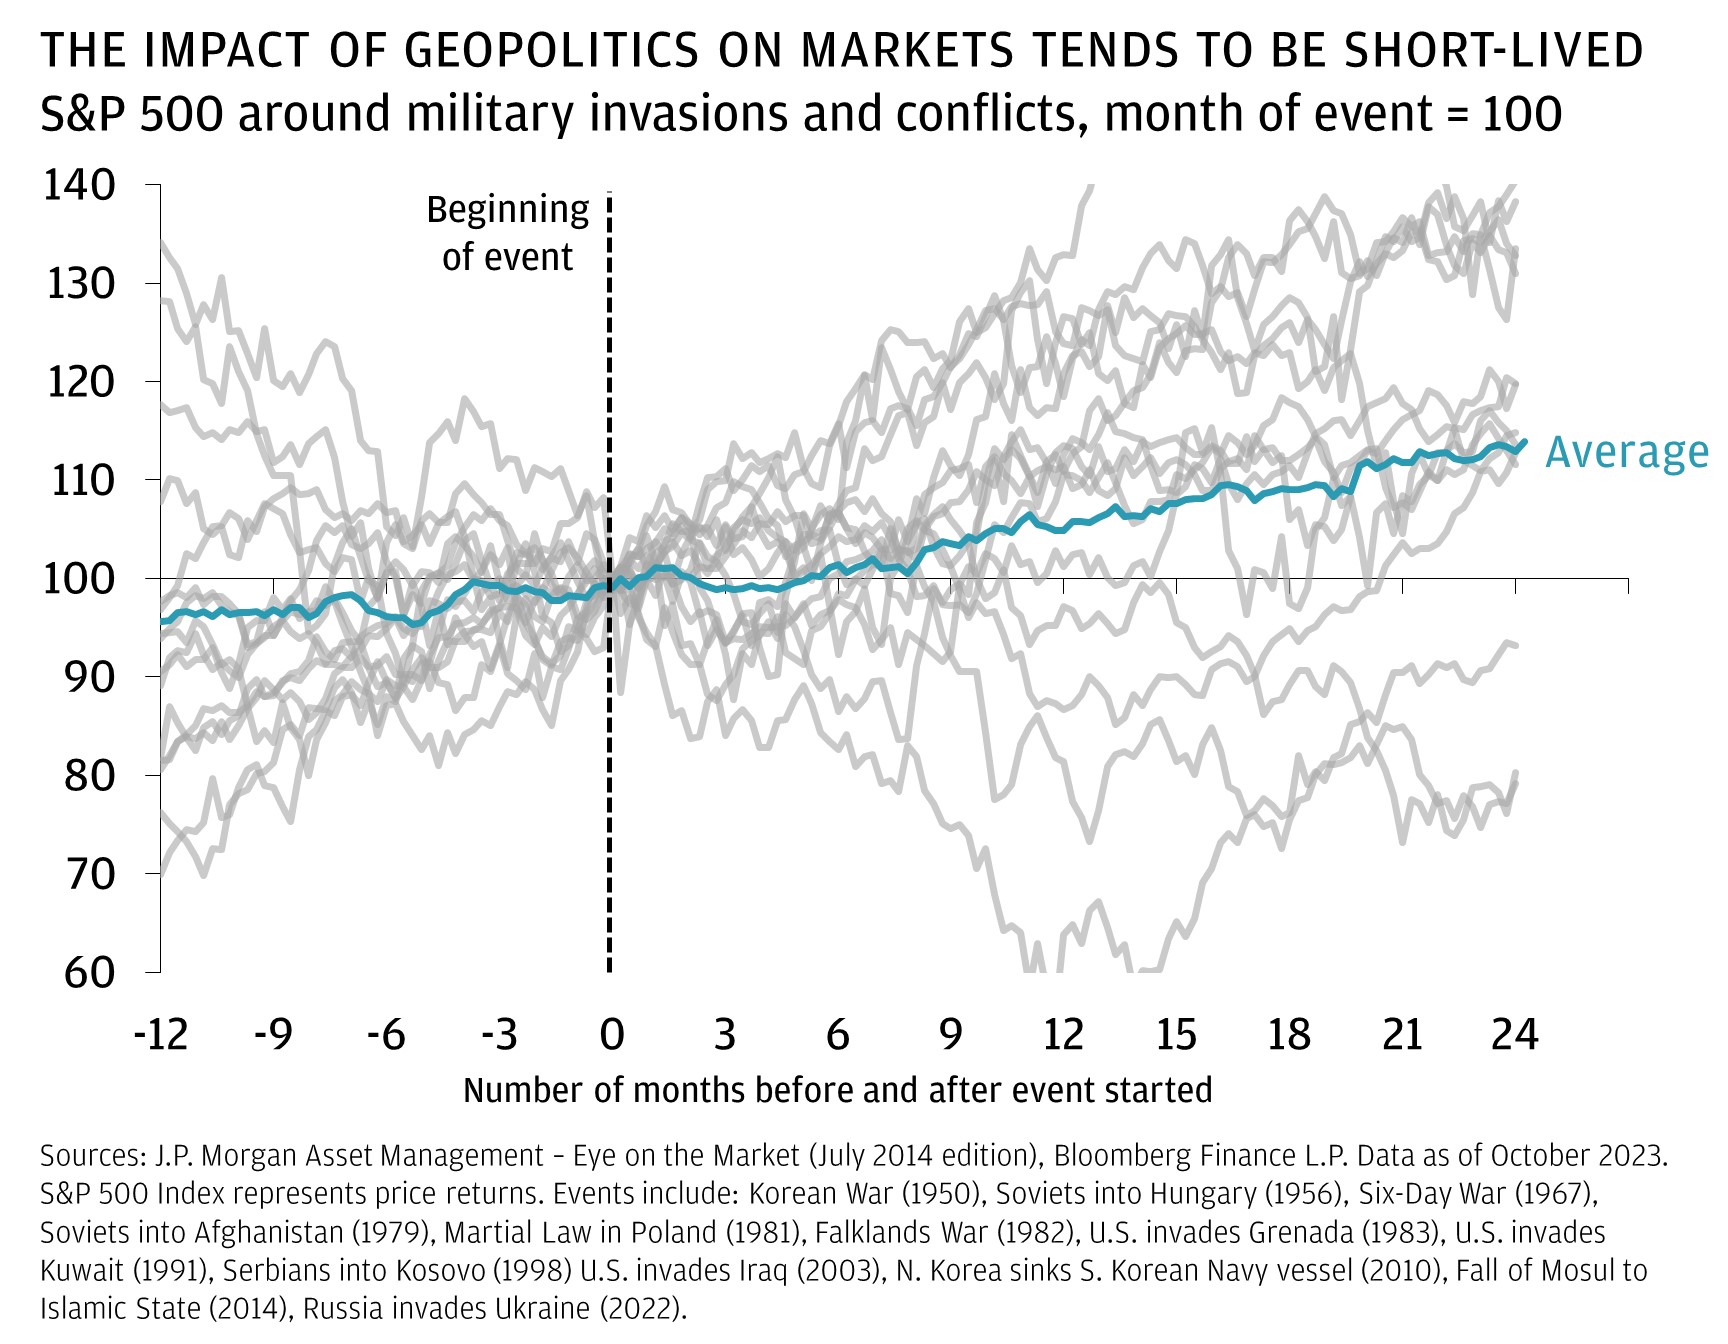 THE IMPACT OF GEOPOLITICS ON MARKETS TENDS TO BE SHORT-LIVED